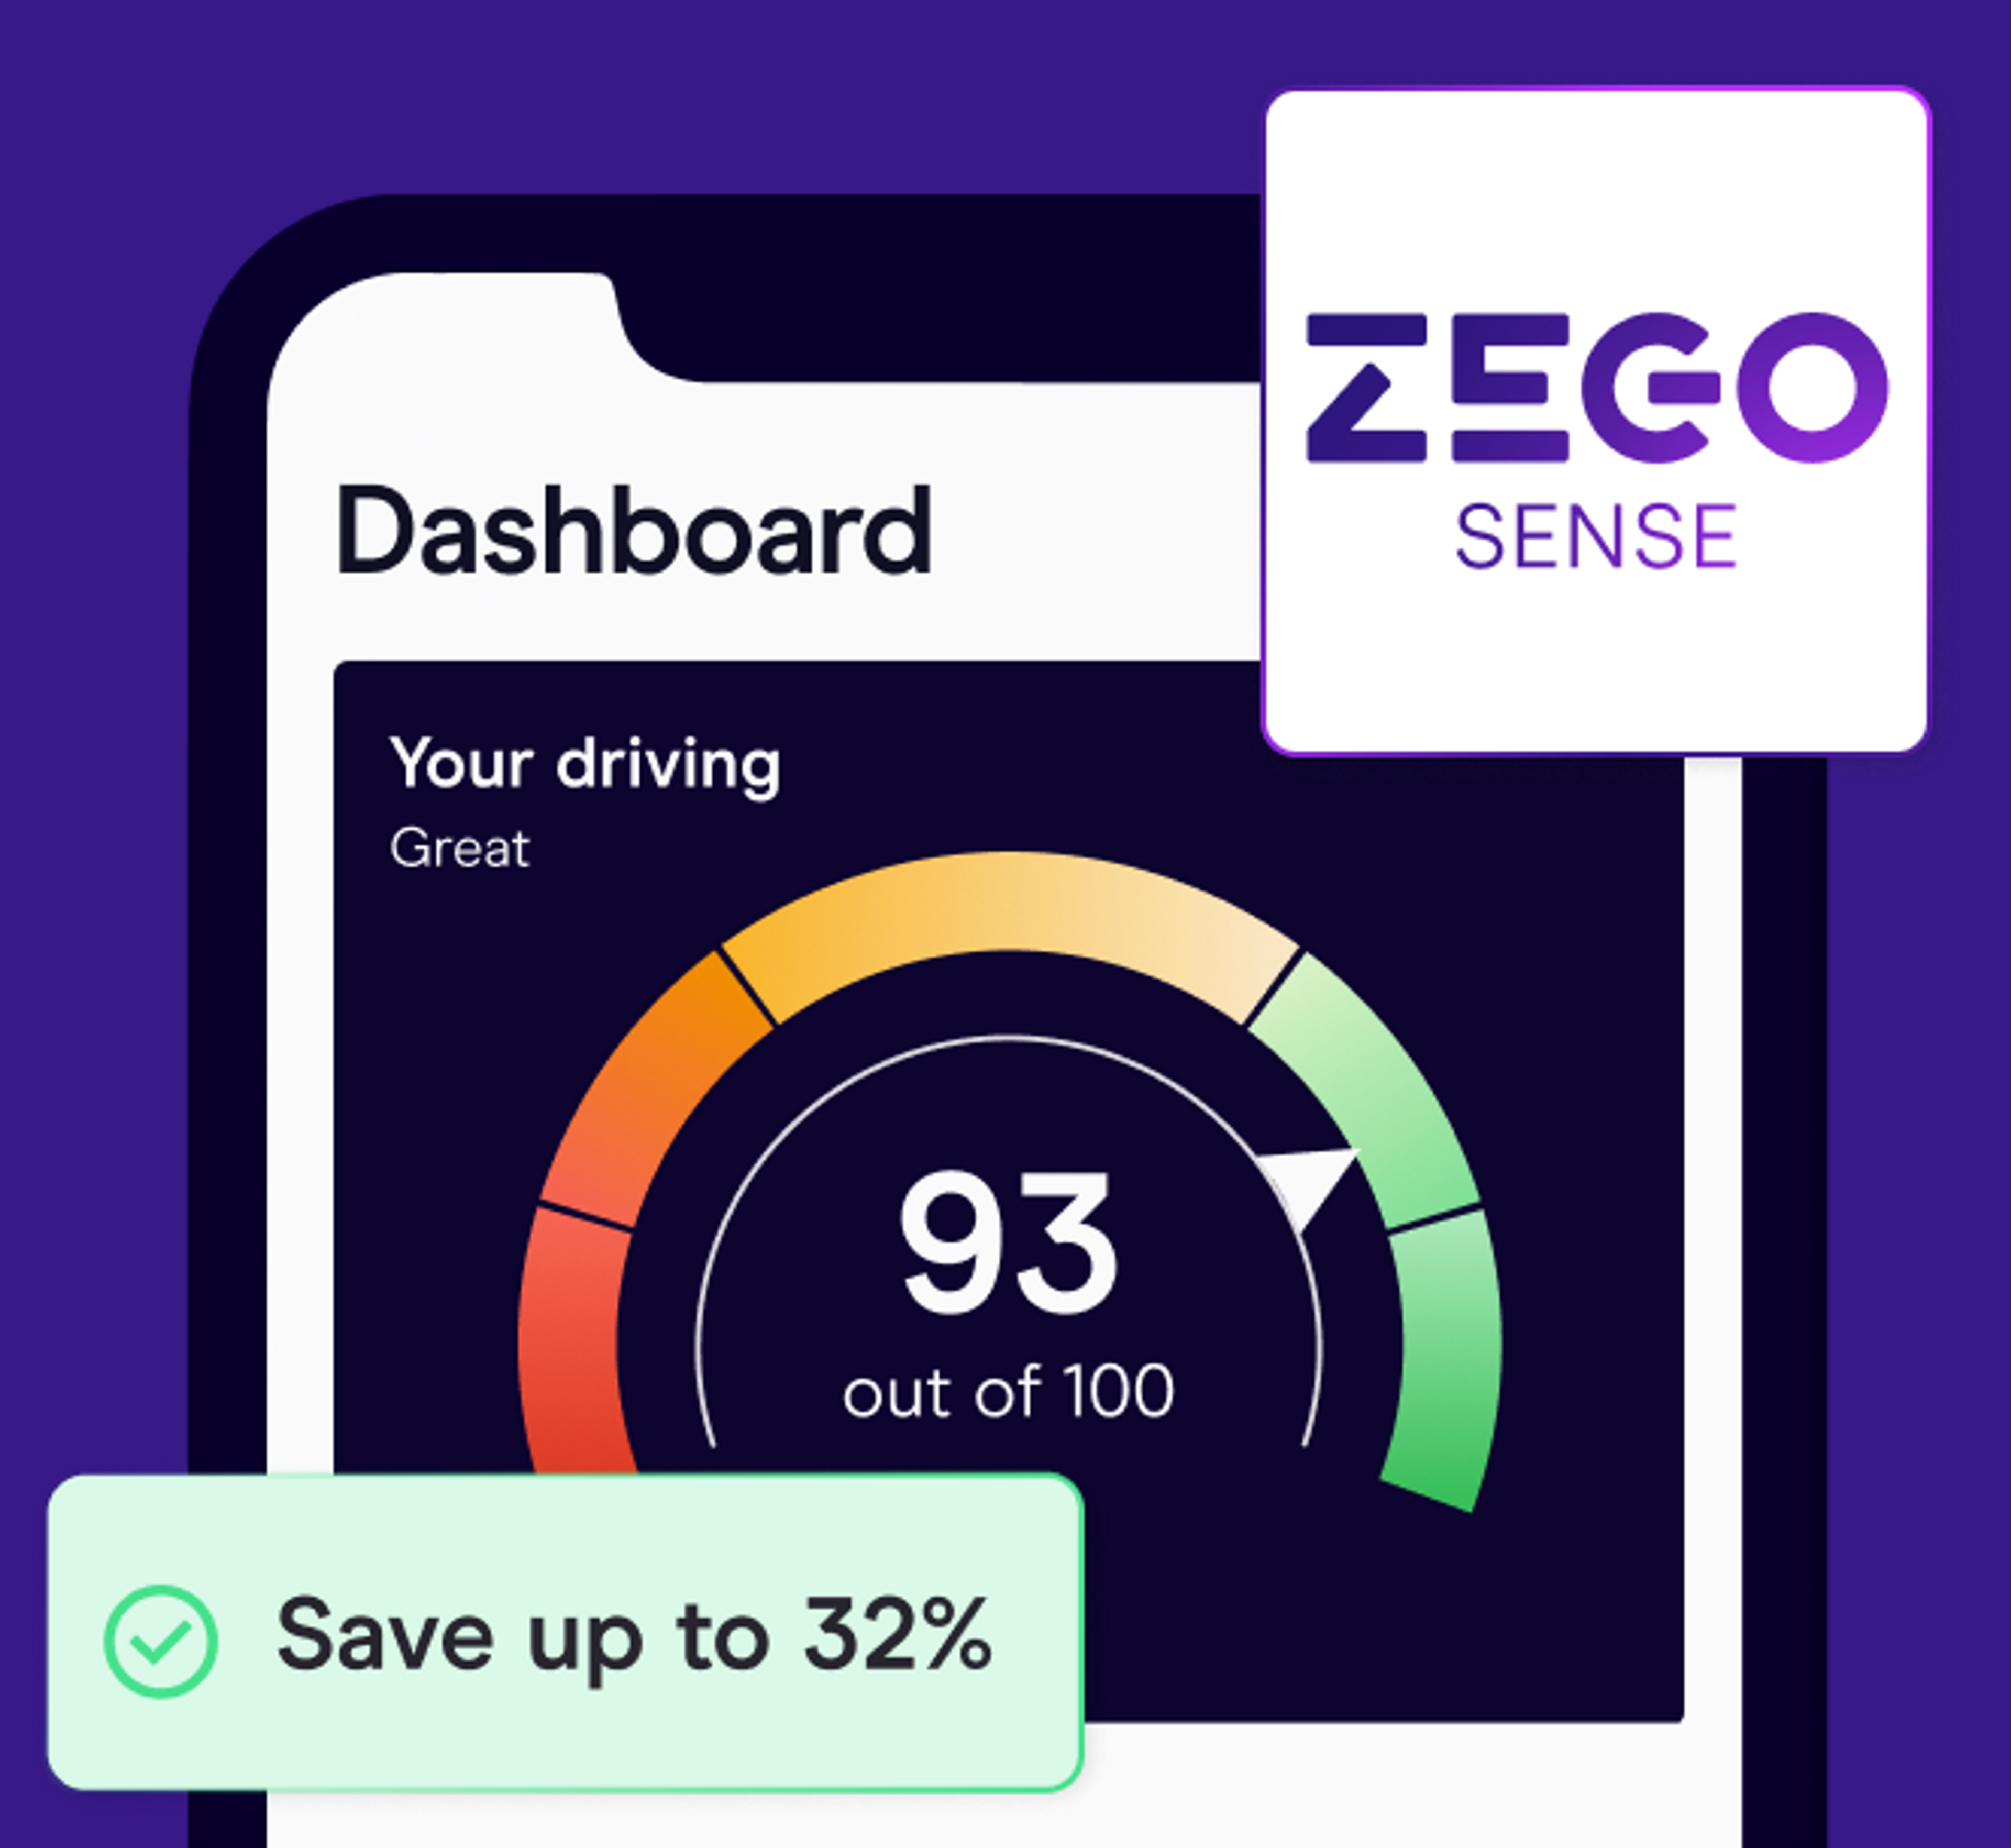 zego sense app for private hire taxi drivers